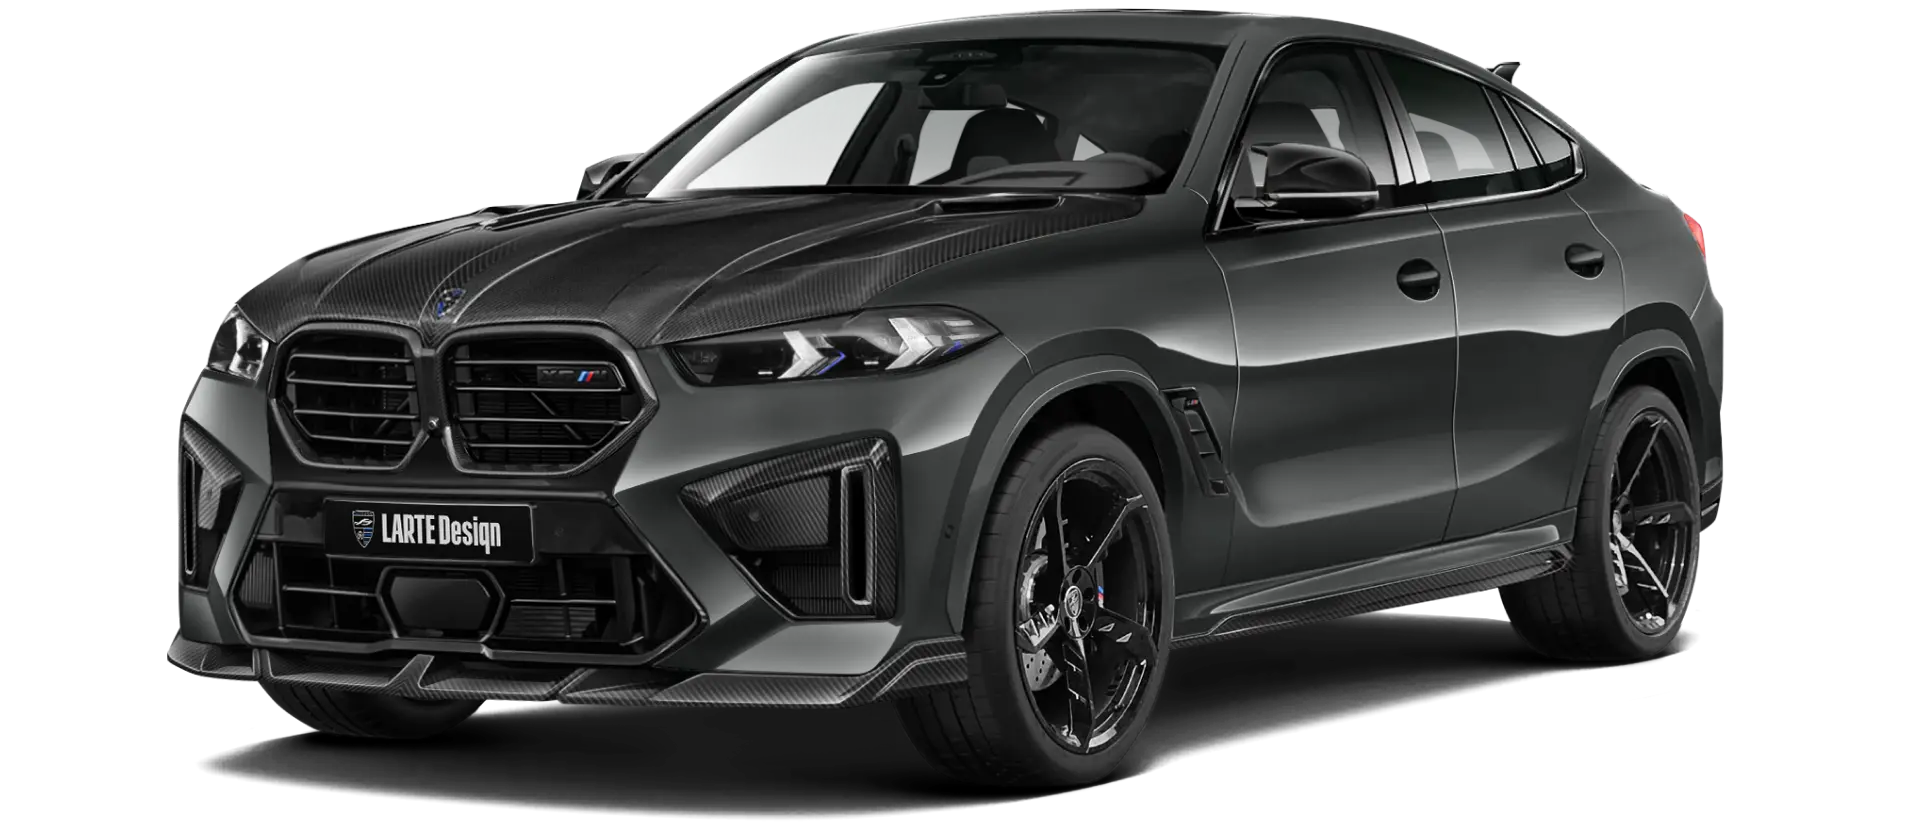 BMW X6M F96 LCI 2023 with carbon body kit: front view shown in Dravit grey